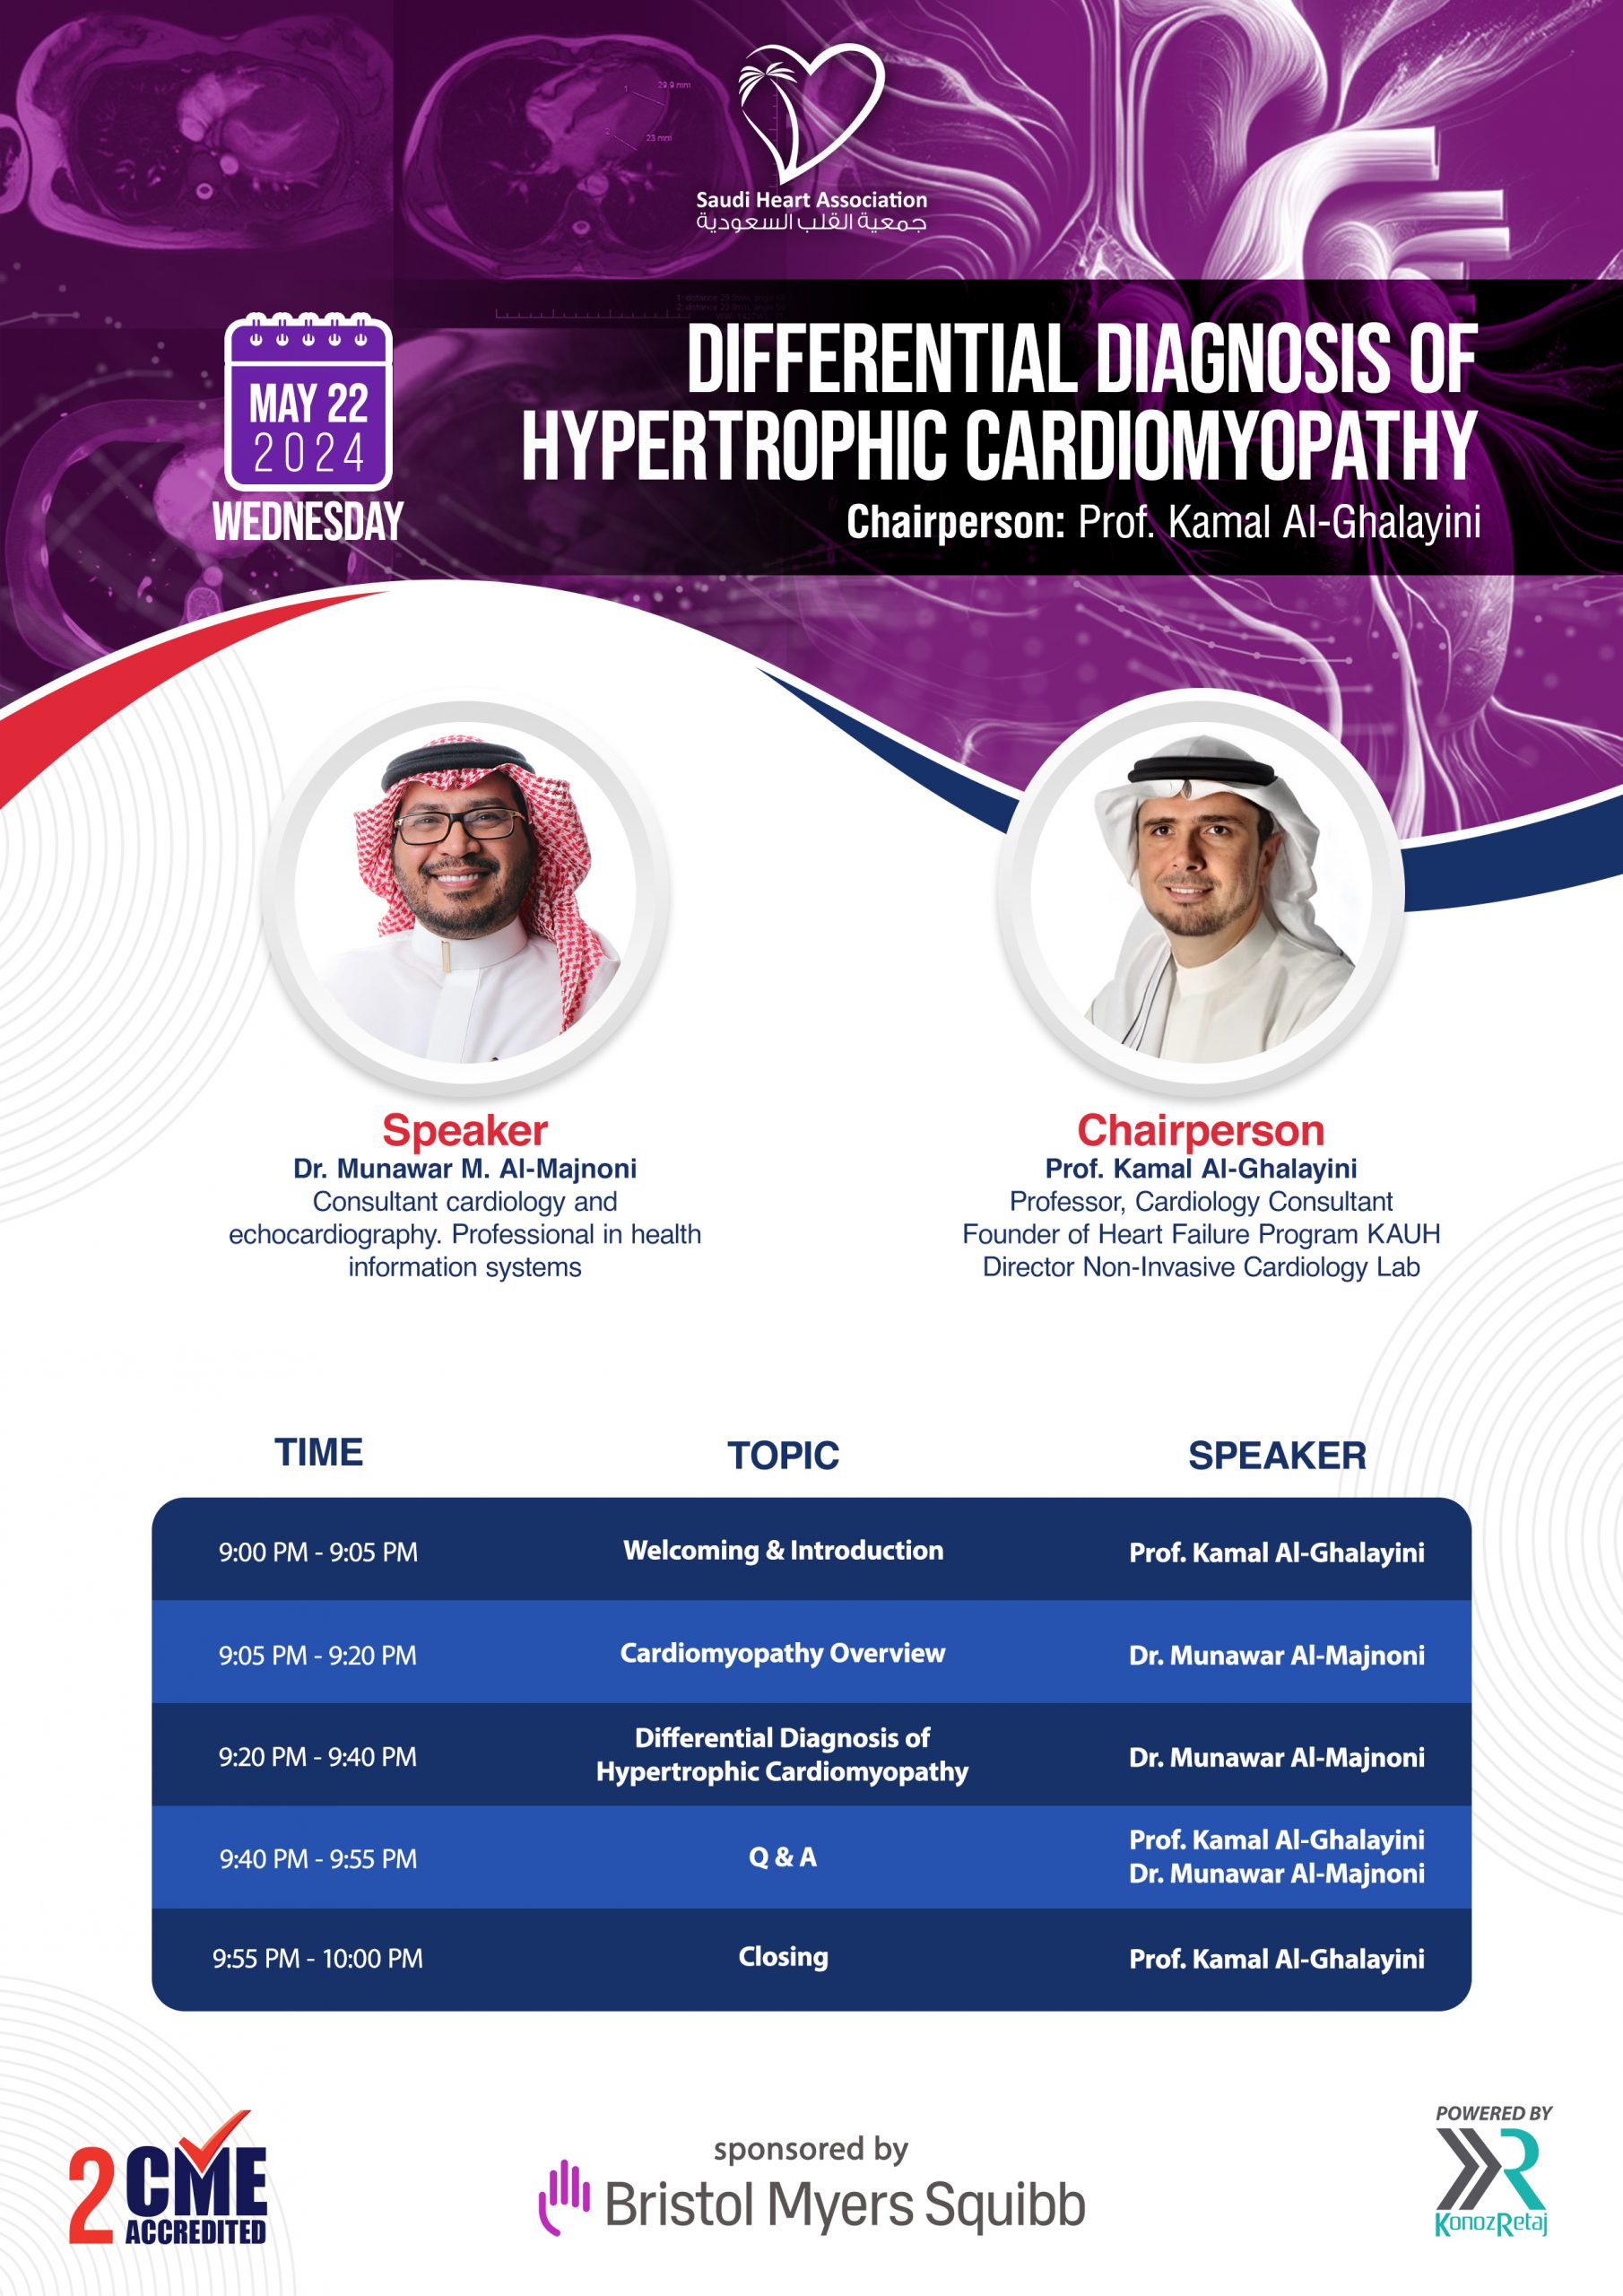 Differential Diagnosis of Hypertrophic Cardiomyopathy – May 22, 2024